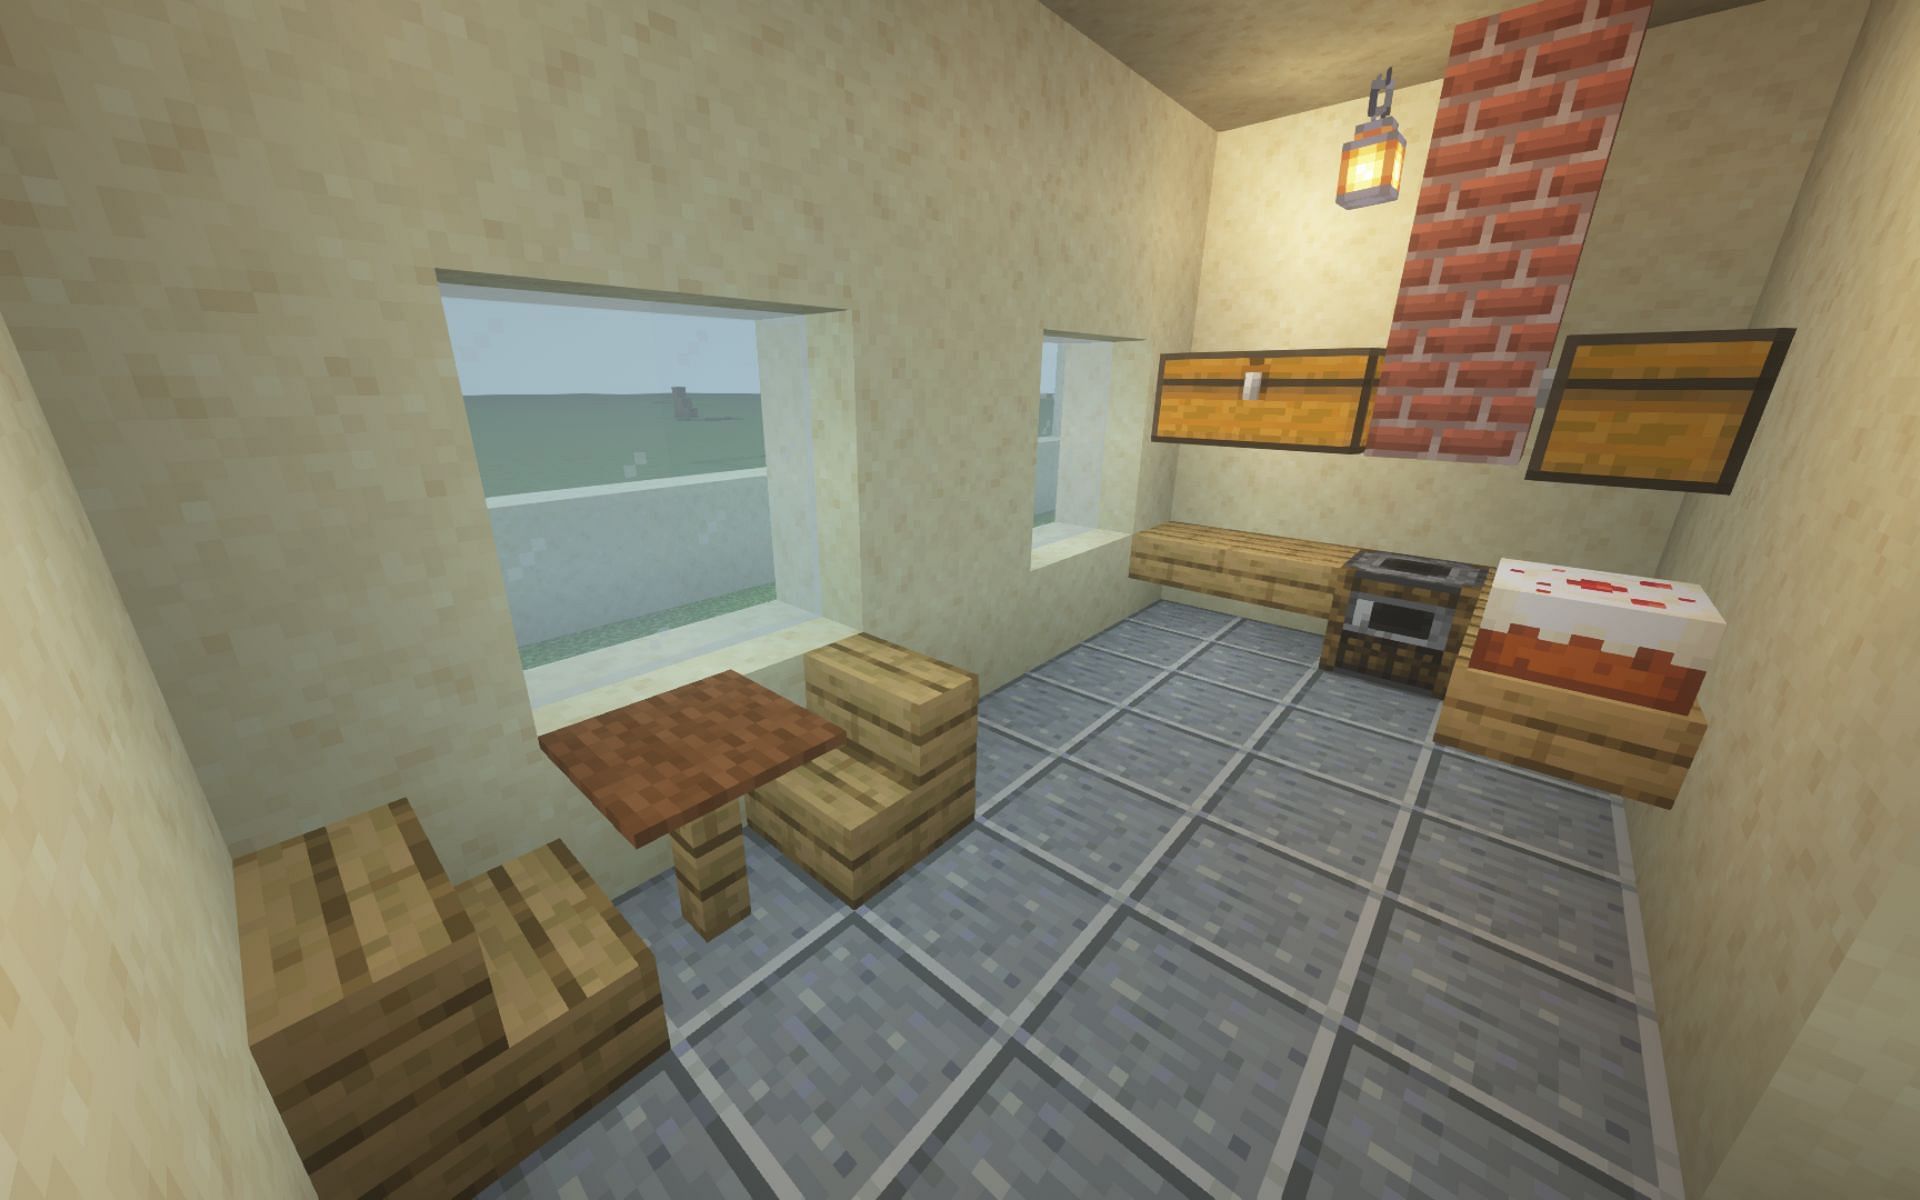 A kitchen can actually be used by players in Minecraft (Image via Mojang)